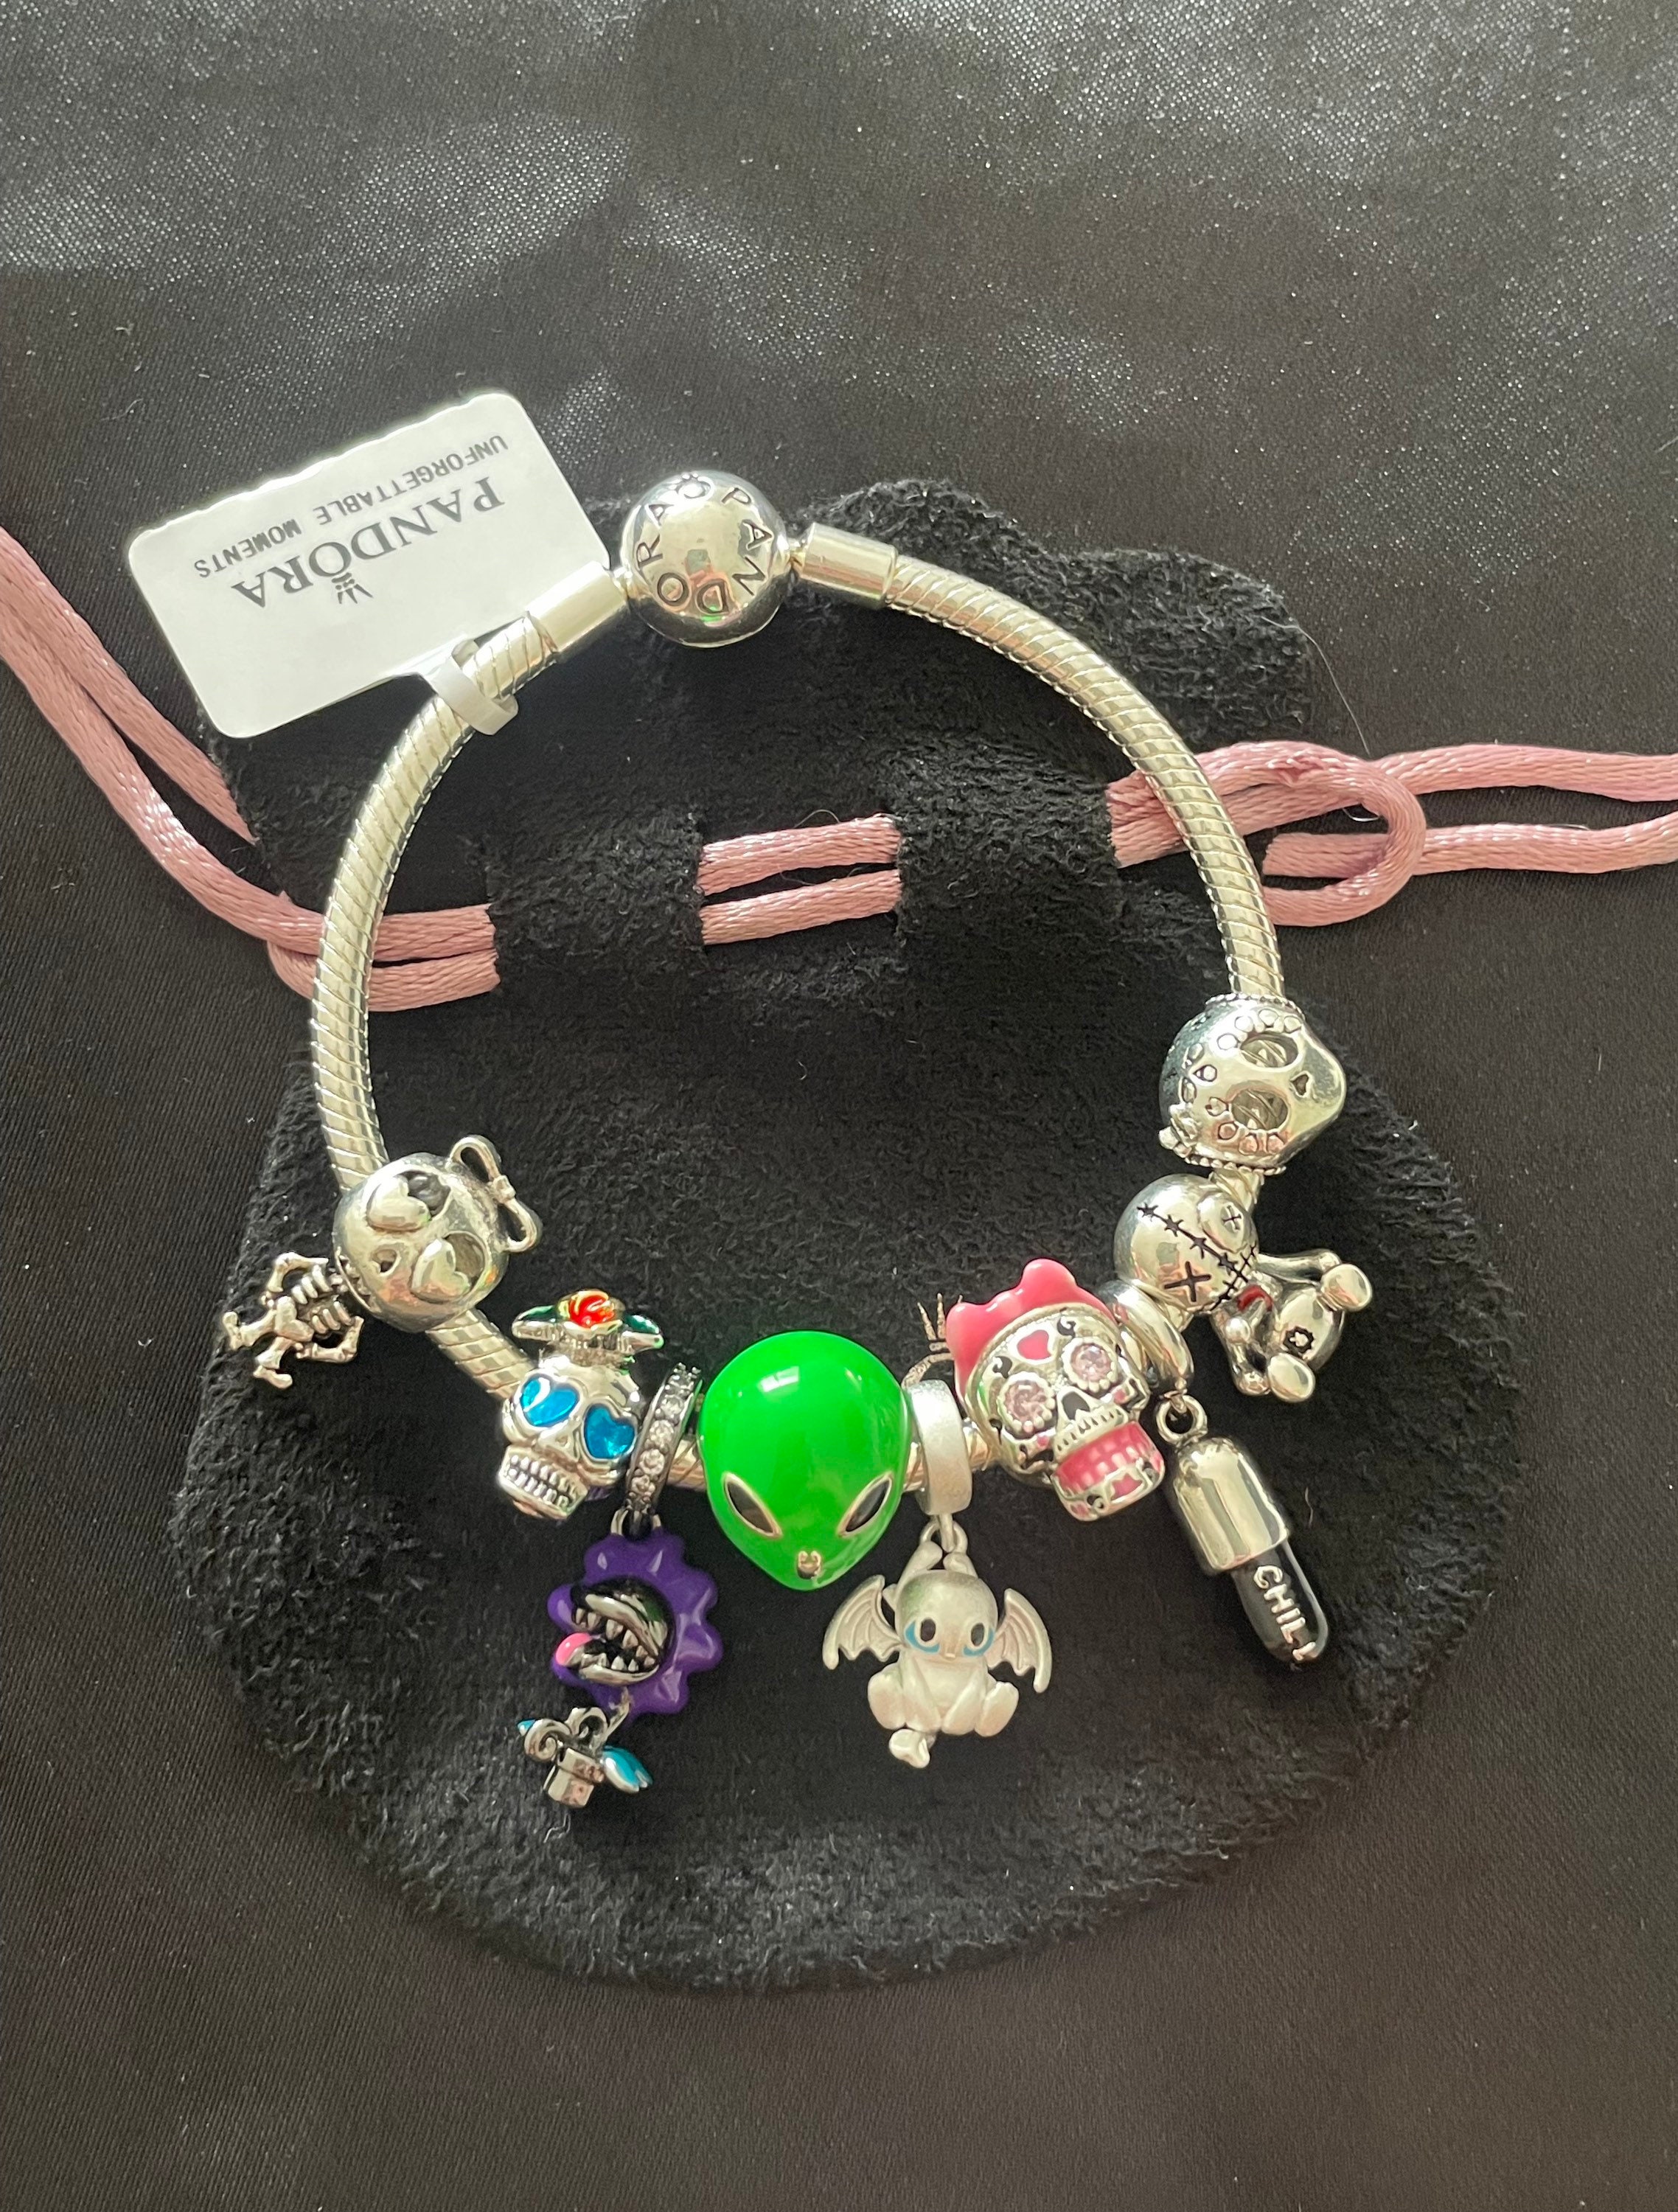 Pandora Bracelet With Cute Themed Charms 